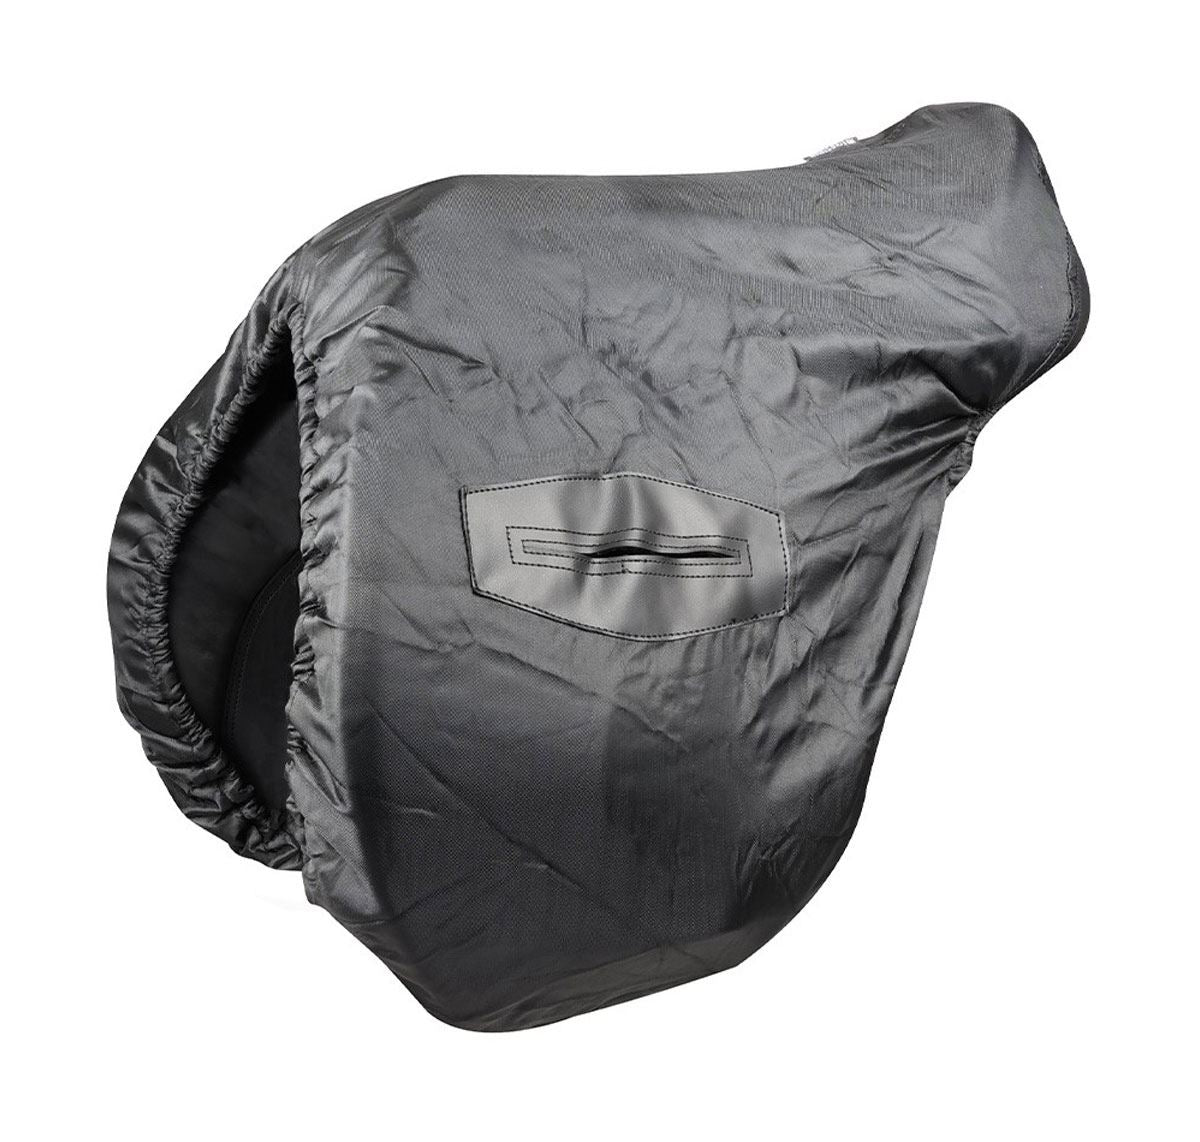 Hy Equestrian Fleece Lined Waterproof Ride On Saddle Cover - Just Horse Riders